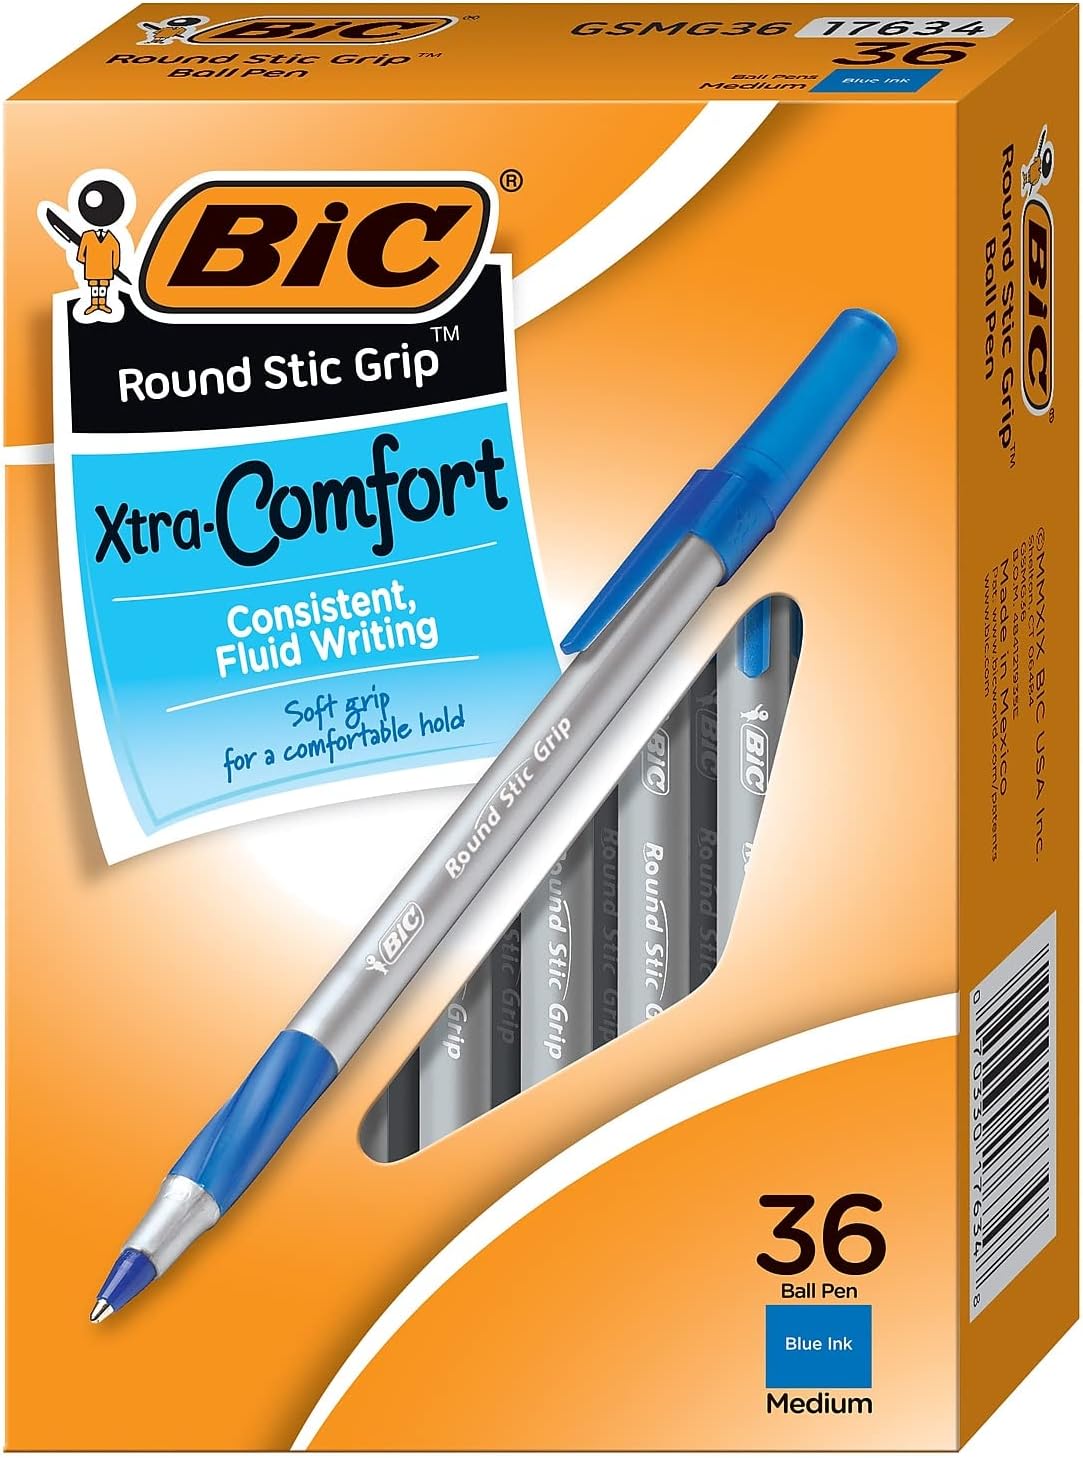 BIC Round Stic Grip Xtra Comfort Blue Ballpoint Pens, Medium Point (1.2mm), 36-Count Pack, Excellent Writing Pens With Soft Grip for Superb Comfort and Control